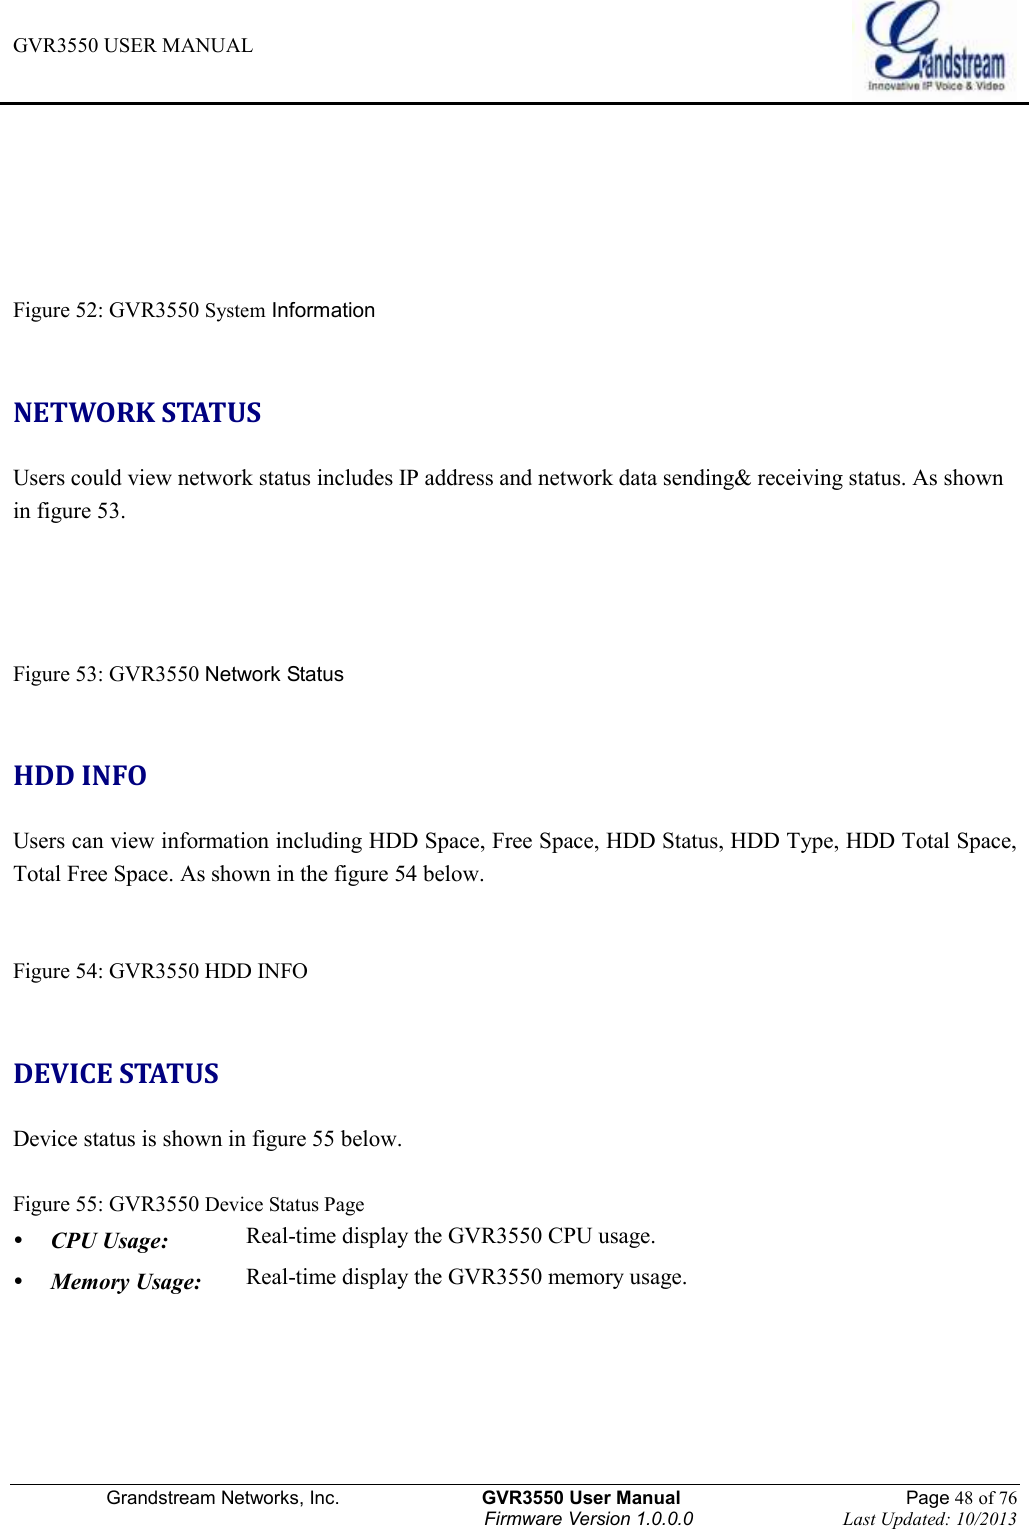 GVR3550 USER MANUAL   Grandstream Networks, Inc.                    GVR3550 User Manual                                                Page 48 of 76 Firmware Version 1.0.0.0                                Last Updated: 10/2013     Figure 52: GVR3550 System Information    NETWORK STATUS Users could view network status includes IP address and network data sending&amp; receiving status. As shown in figure 53.   Figure 53: GVR3550 Network Status  HDD INFO Users can view information including HDD Space, Free Space, HDD Status, HDD Type, HDD Total Space, Total Free Space. As shown in the figure 54 below.   Figure 54: GVR3550 HDD INFO  DEVICE STATUS Device status is shown in figure 55 below.  Figure 55: GVR3550 Device Status Page  CPU Usage:   Real-time display the GVR3550 CPU usage.    Memory Usage:   Real-time display the GVR3550 memory usage.   